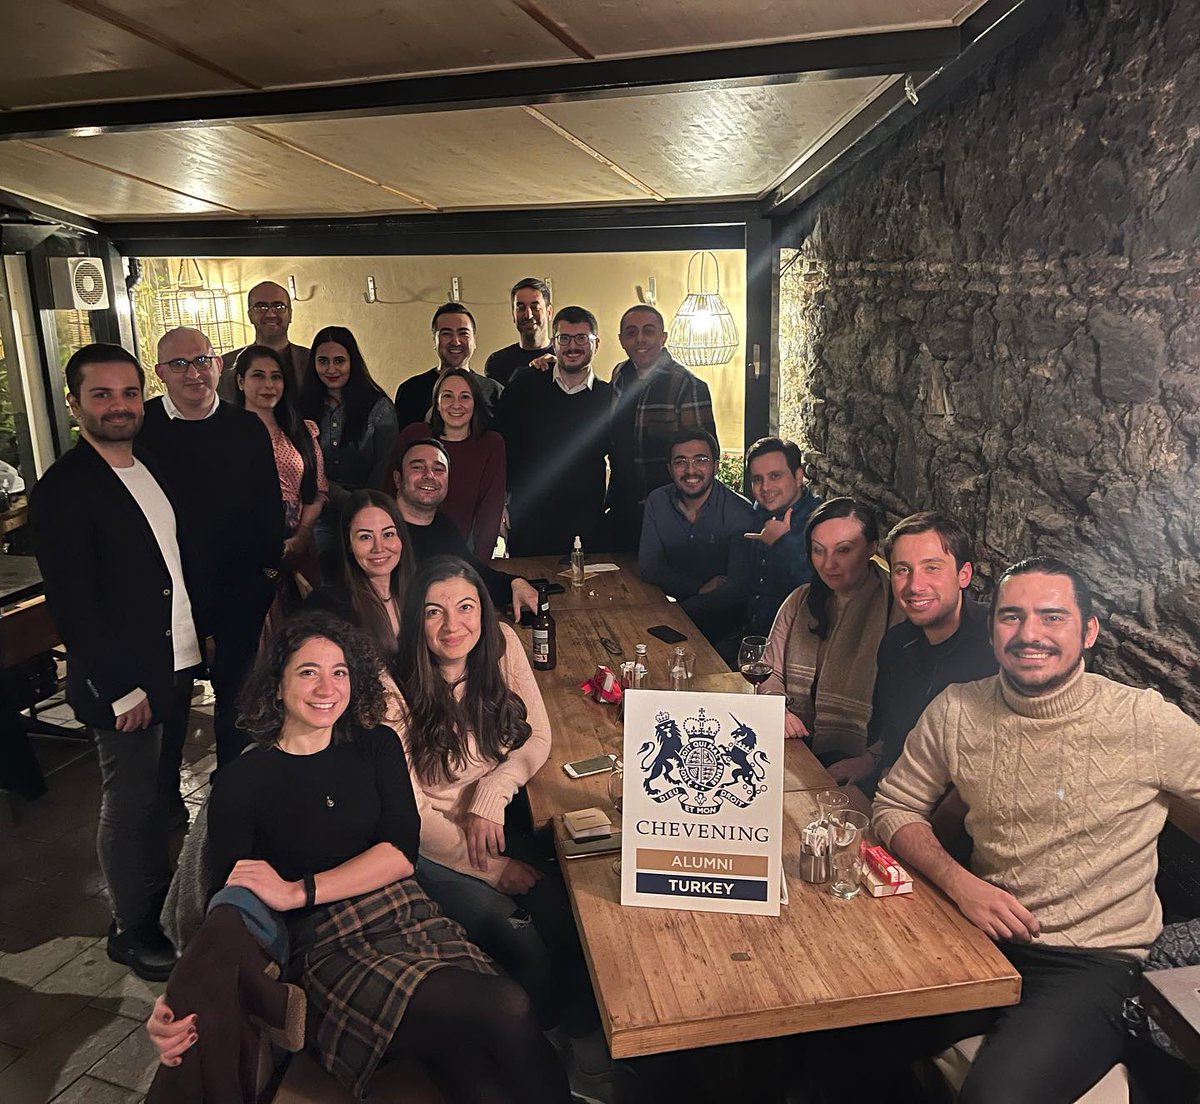 Chevening Alumni Network New Year Dinner Wishing you a happy New Year - may 2022 be your best year yet 🎄☃️🥳